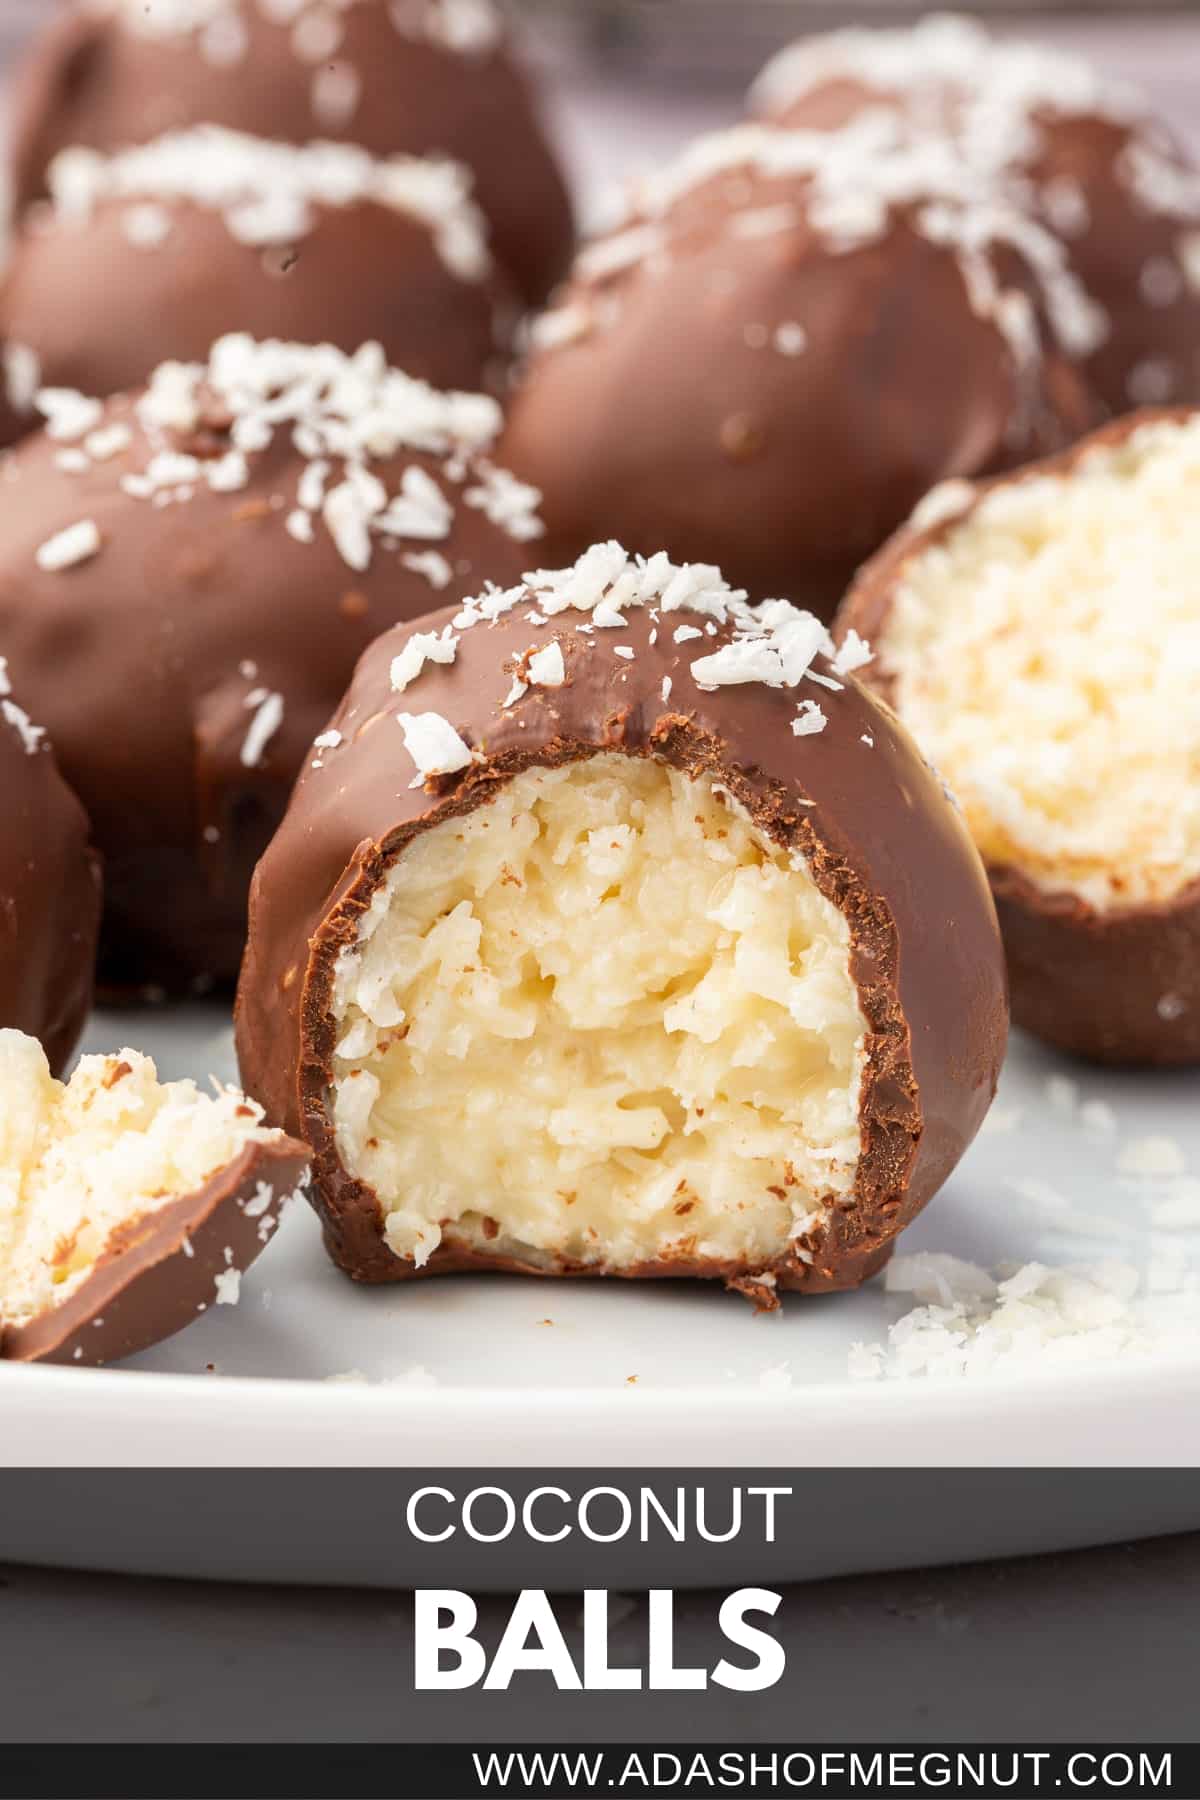 A chocolate covered coconut truffle with a bite taken out of it with additional coconut balls in the background.